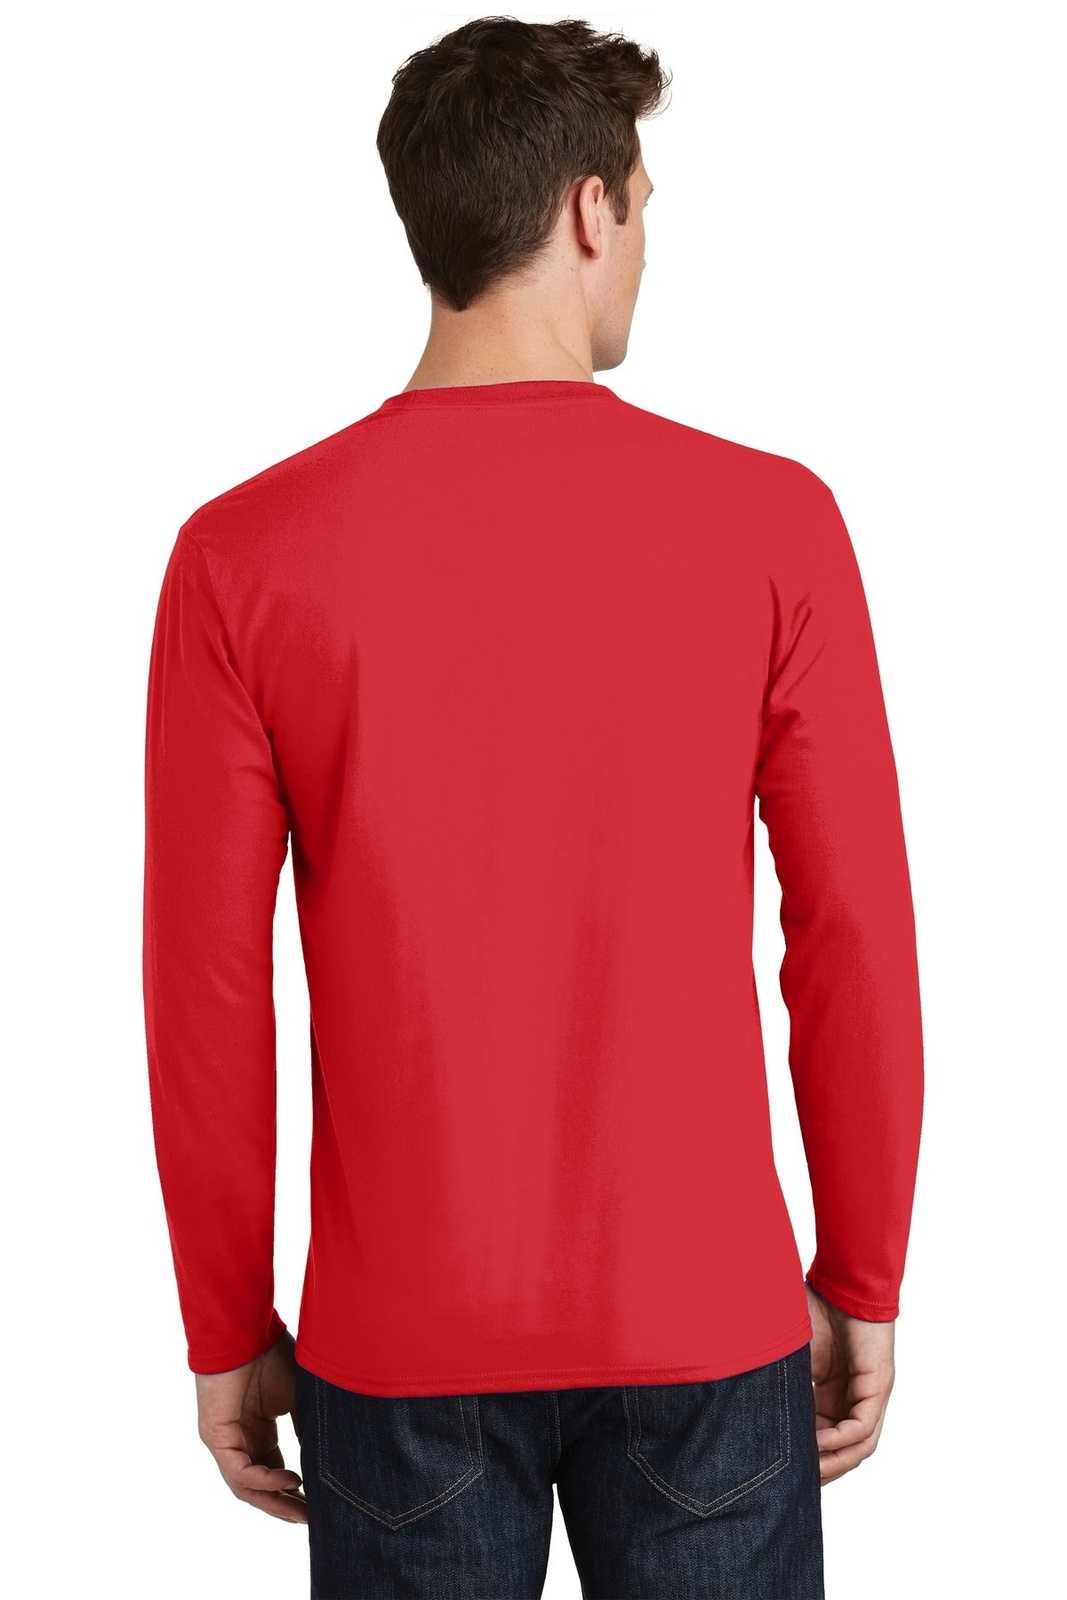 Port &amp; Company PC450LS Long Sleeve Fan Favorite Tee - Bright Red - HIT a Double - 2